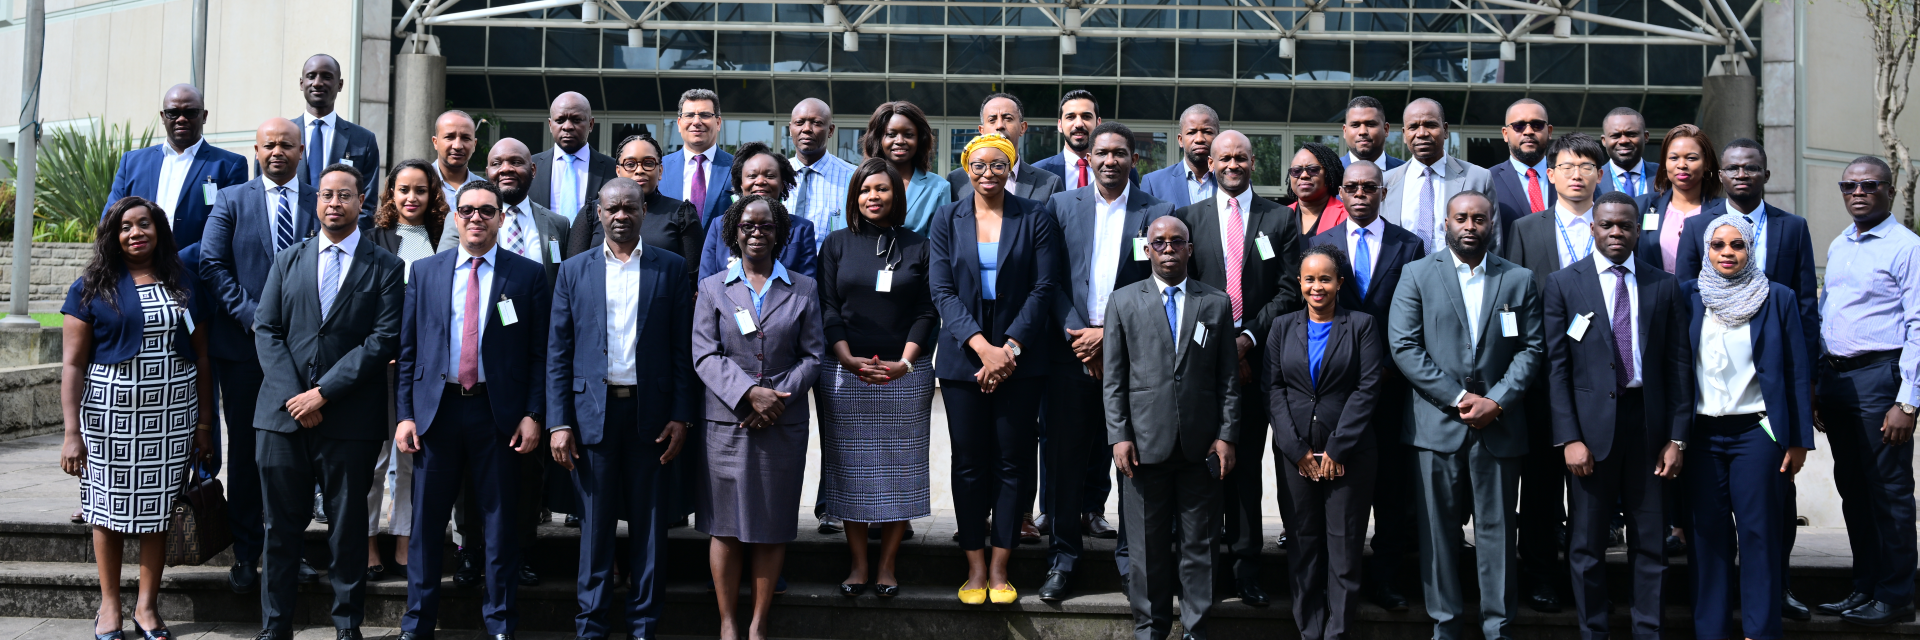 Central Banks in Africa to Convene for Pioneering Workshop on Local Currency and Capital Market Development